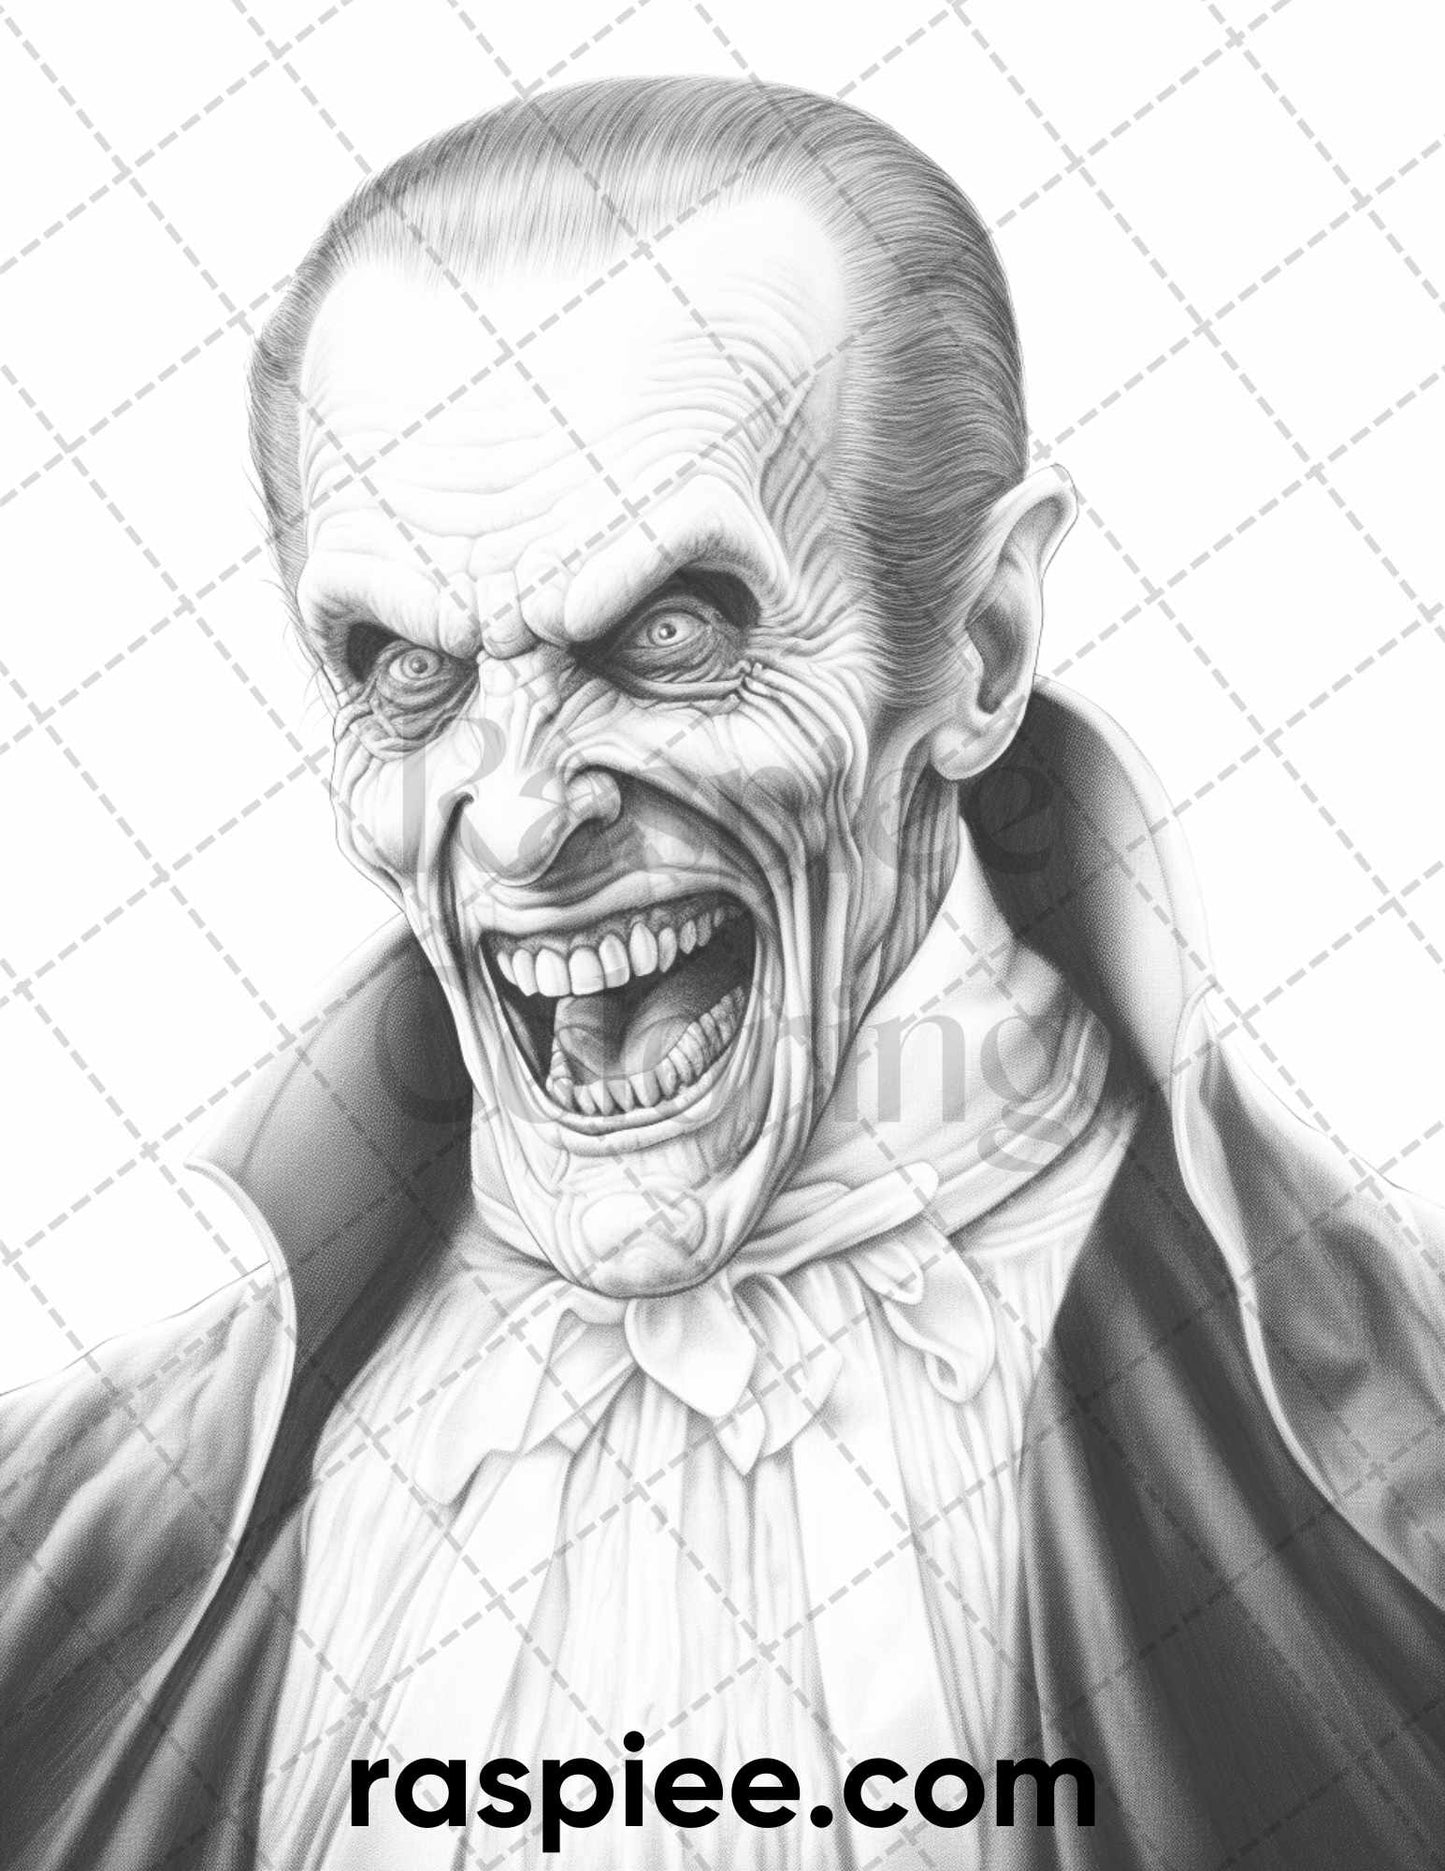 Count Dracula grayscale coloring page, Vampire coloring sheet for adults, Halloween adult coloring printable, Spooky grayscale coloring page, Dark fantasy vampire illustration, Horror-themed coloring printable, Scary Dracula coloring page, Creepy grayscale coloring sheet, Adult relaxation coloring printable, Halloween Coloring Pages for Adults